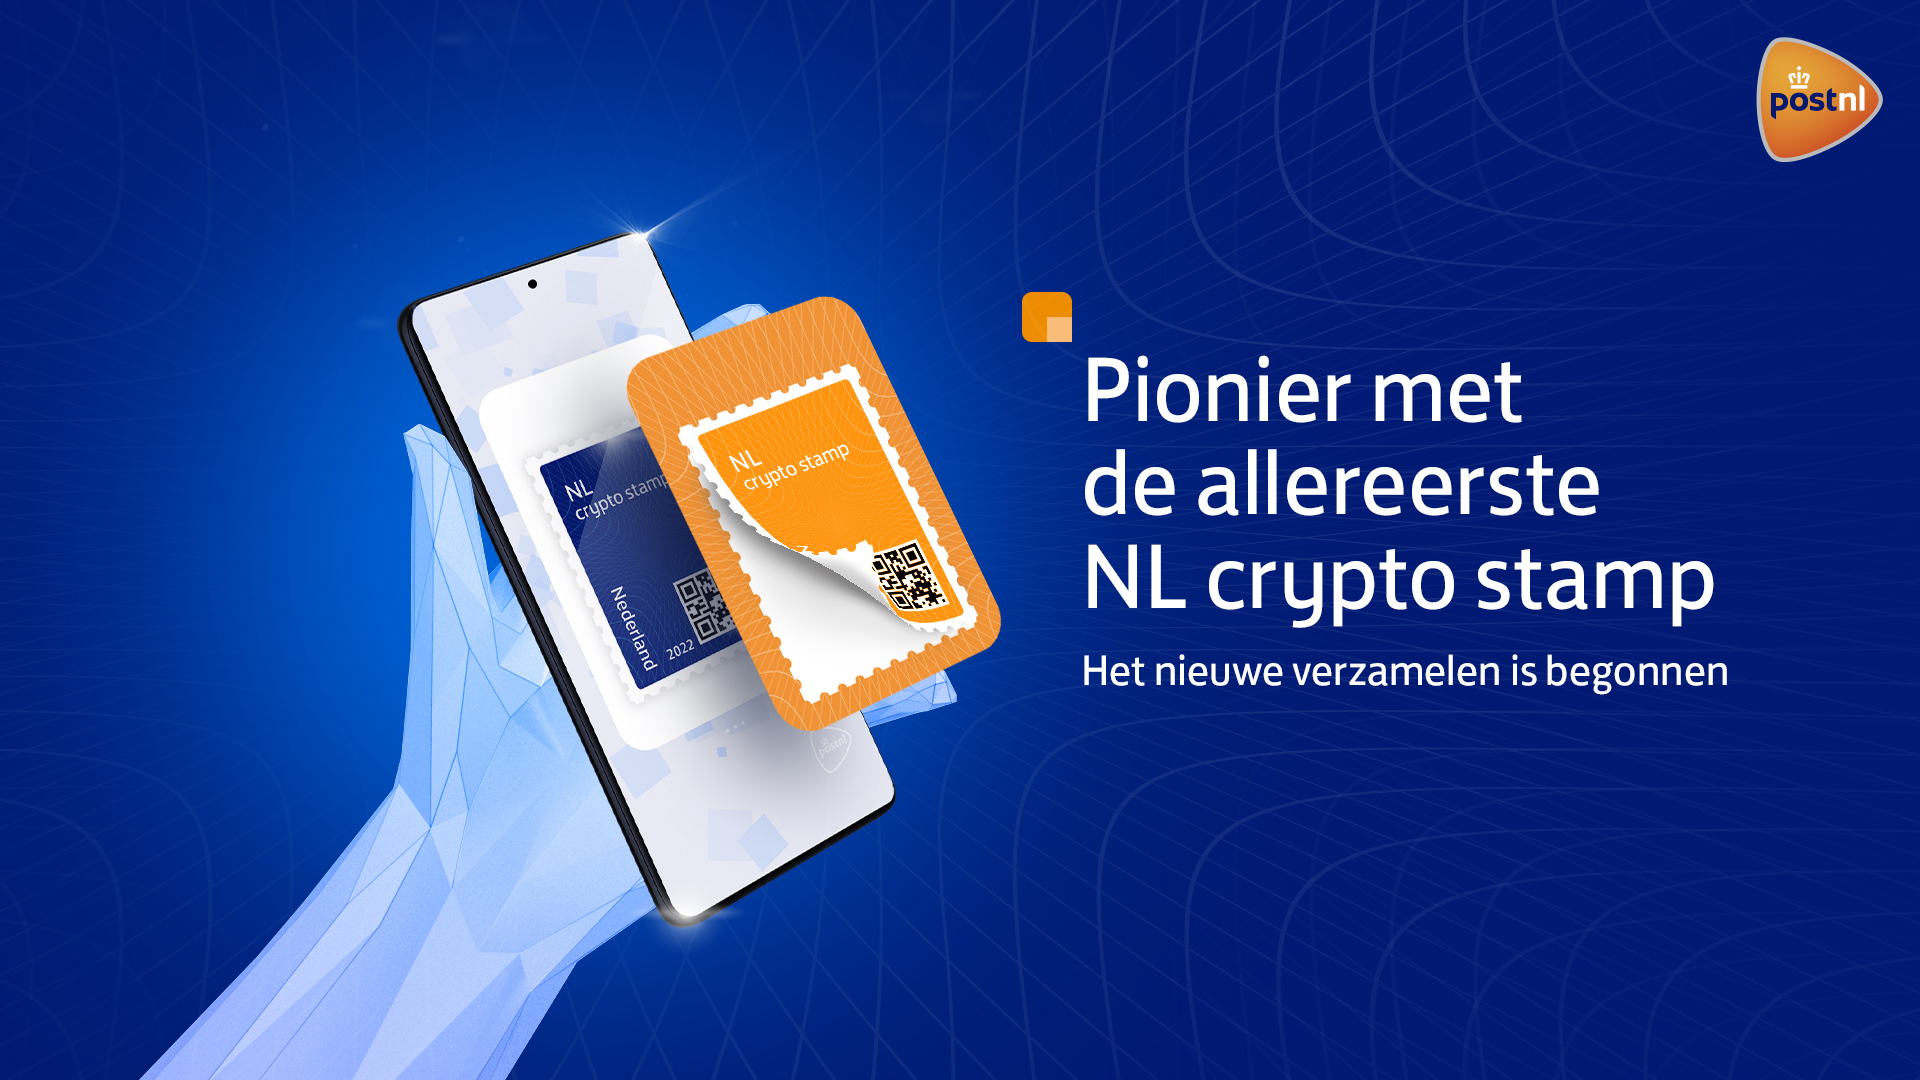 Largest Dutch Postal Company PostNL Launches Crypto Stamp
